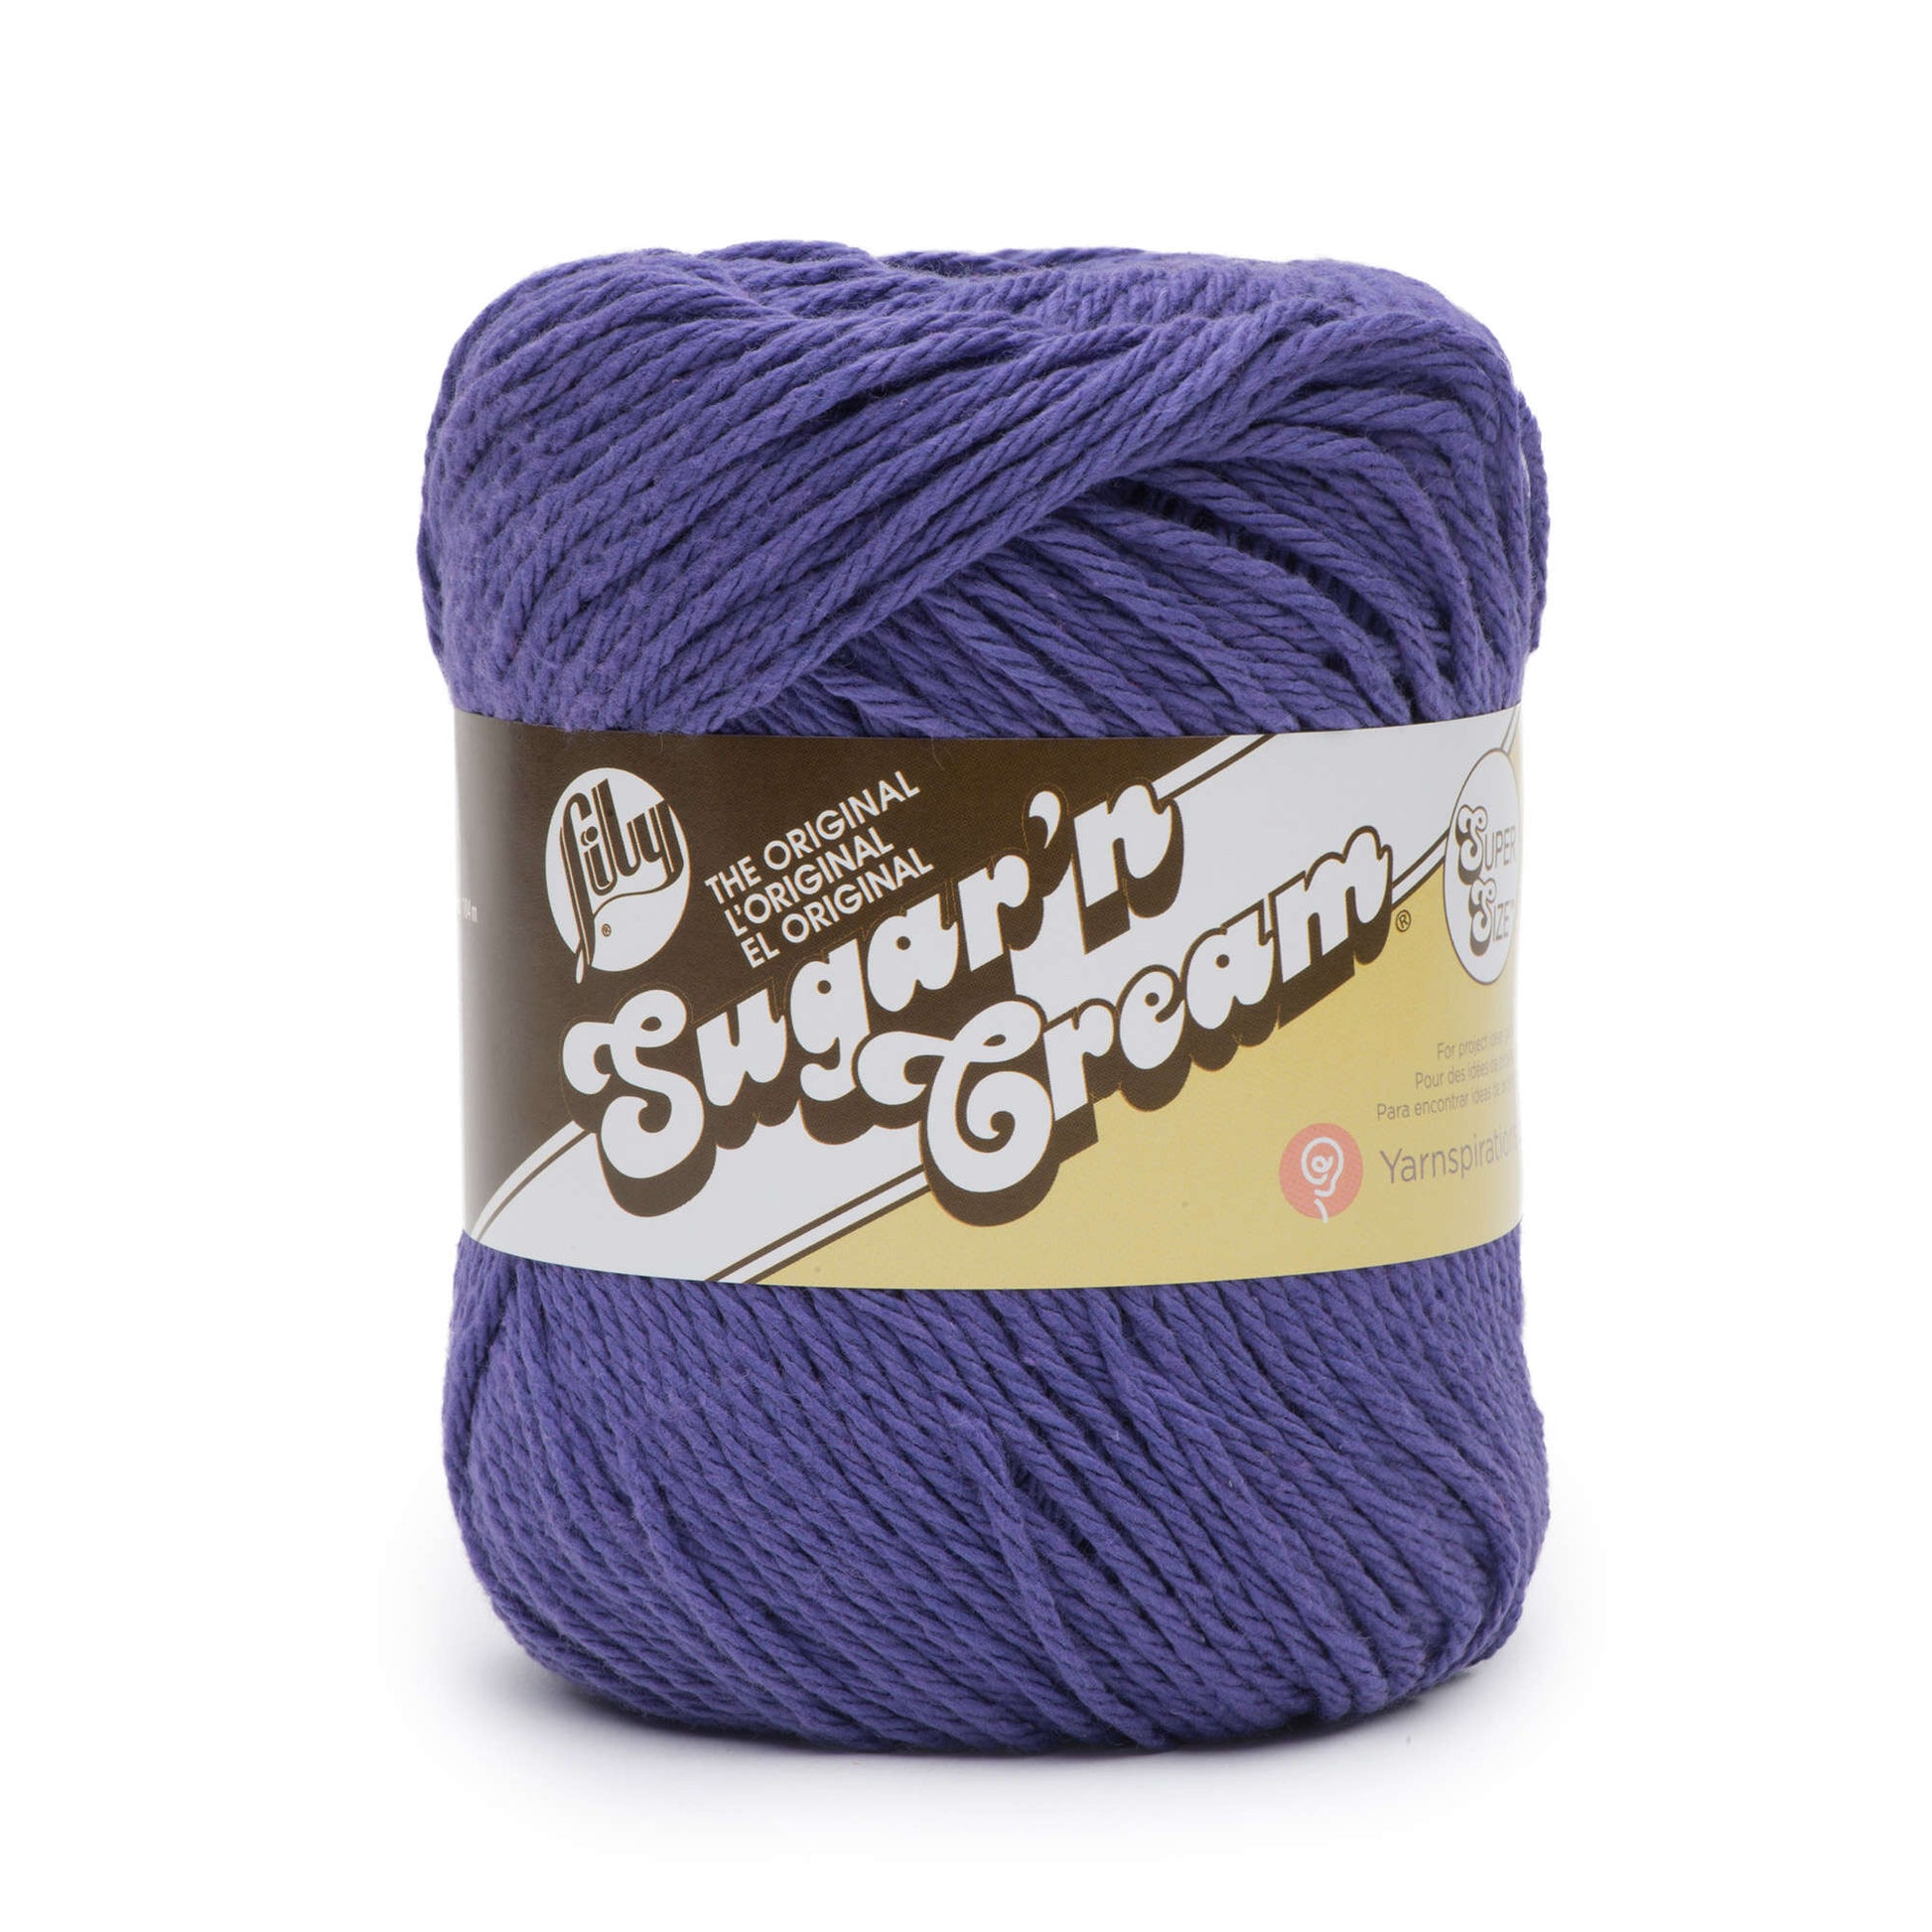 Lily Sugar'n Cream Yarn - Solids Super Size-Hot Pink, 1 count